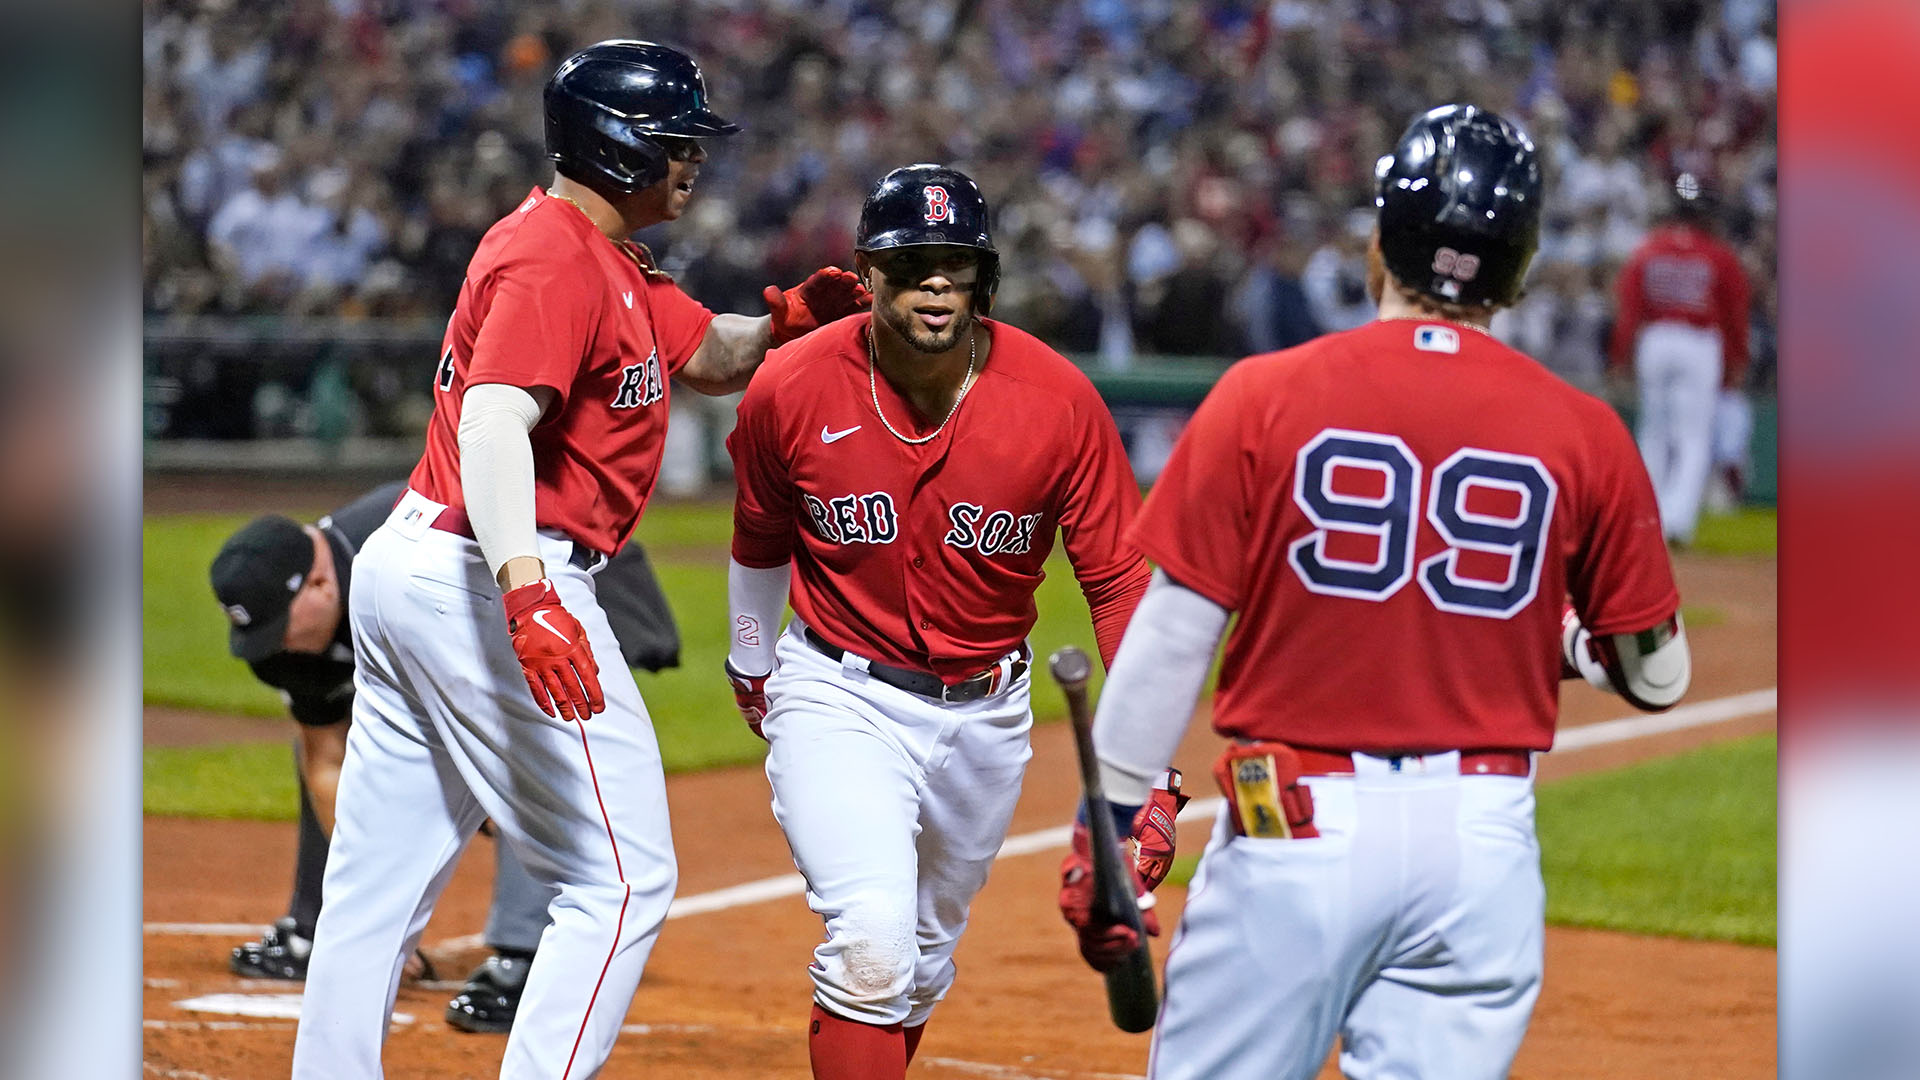 Xander Bogaerts to sign 11-year, $280 million deal with Padres